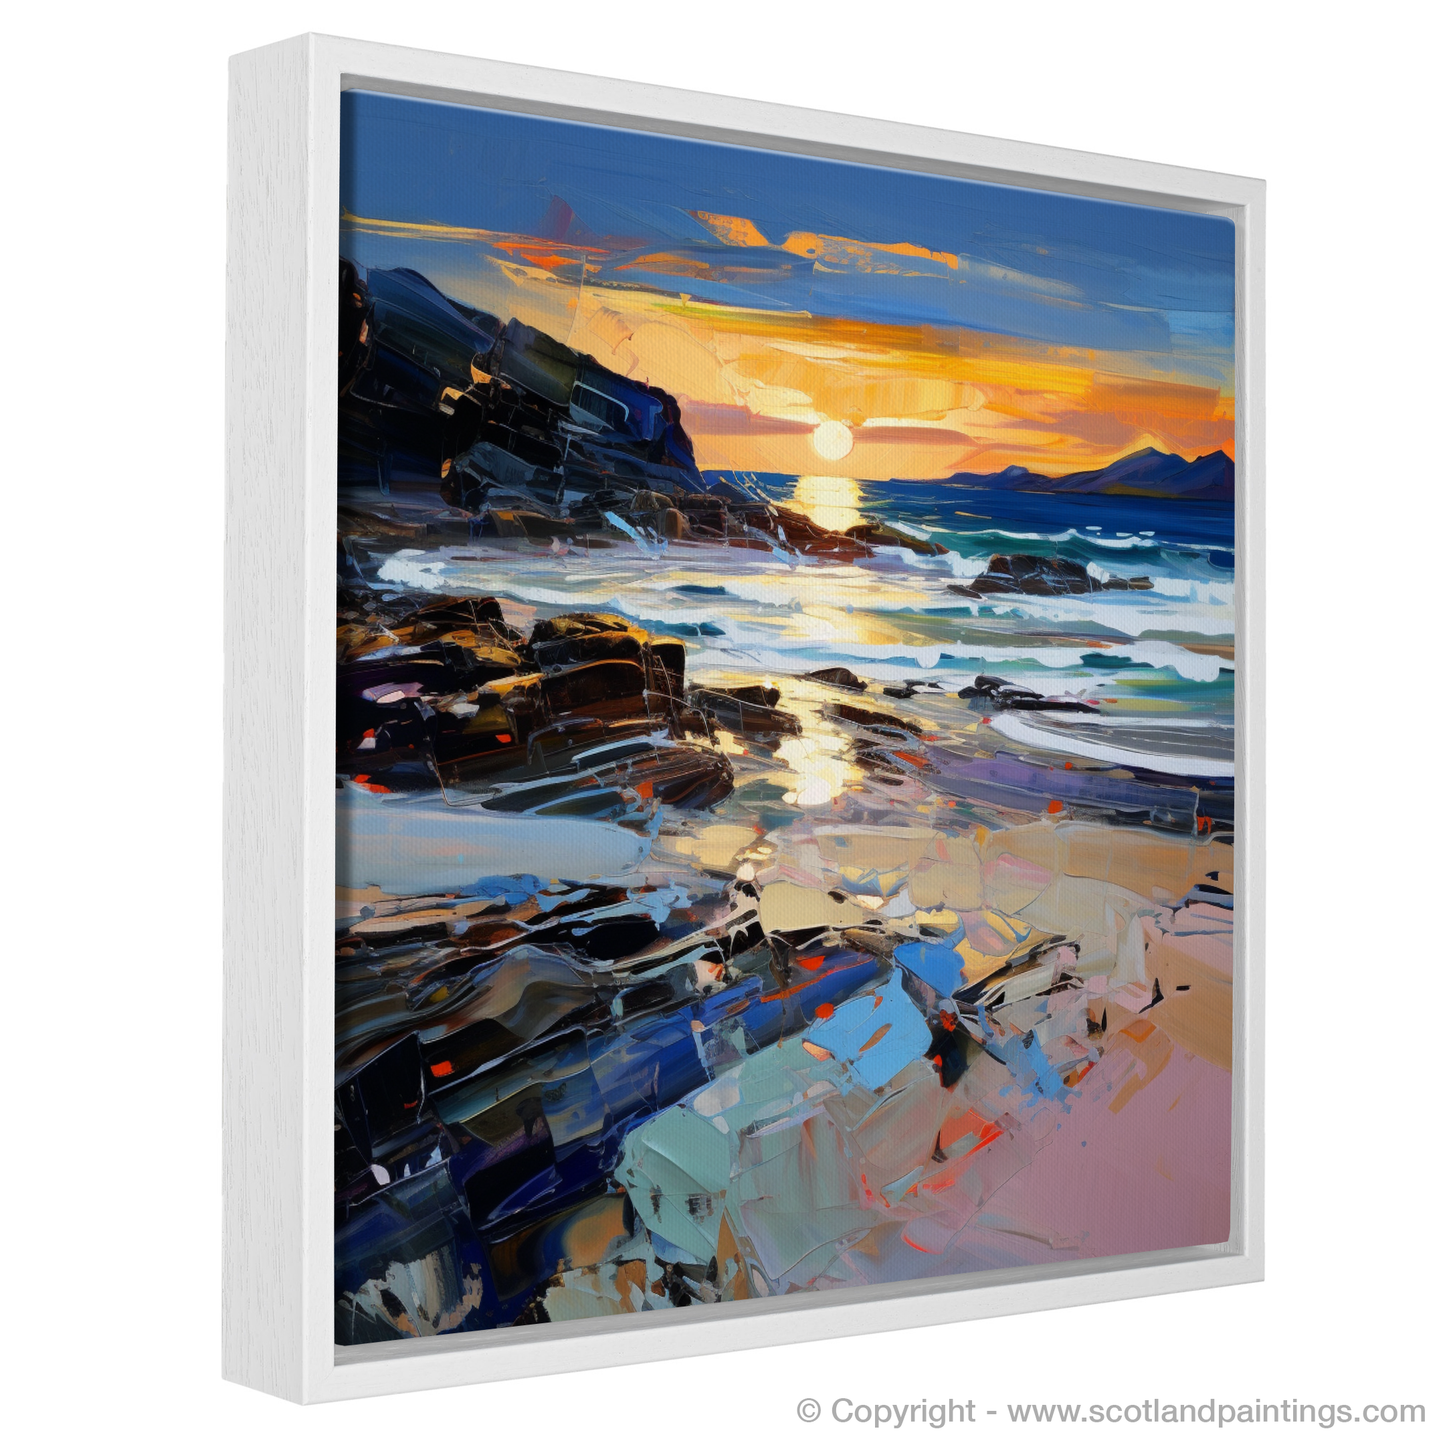 Painting and Art Print of Seilebost Beach at dusk entitled "Dusk Embrace at Seilebost Beach".